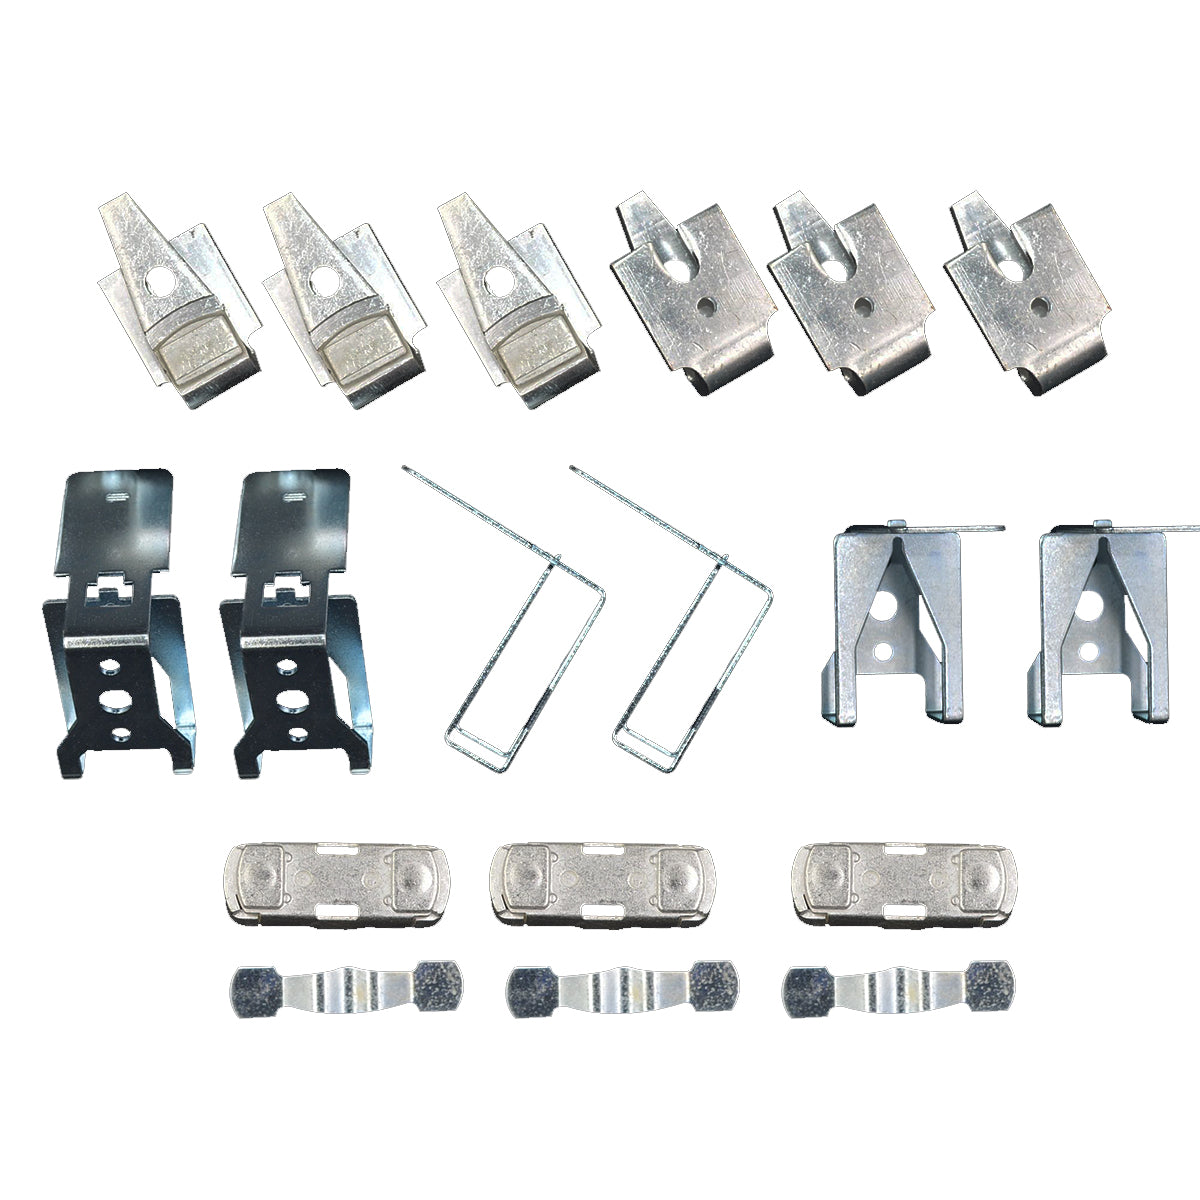 LC1F Contact kits LA5FL431 for the LC1F630 contactor